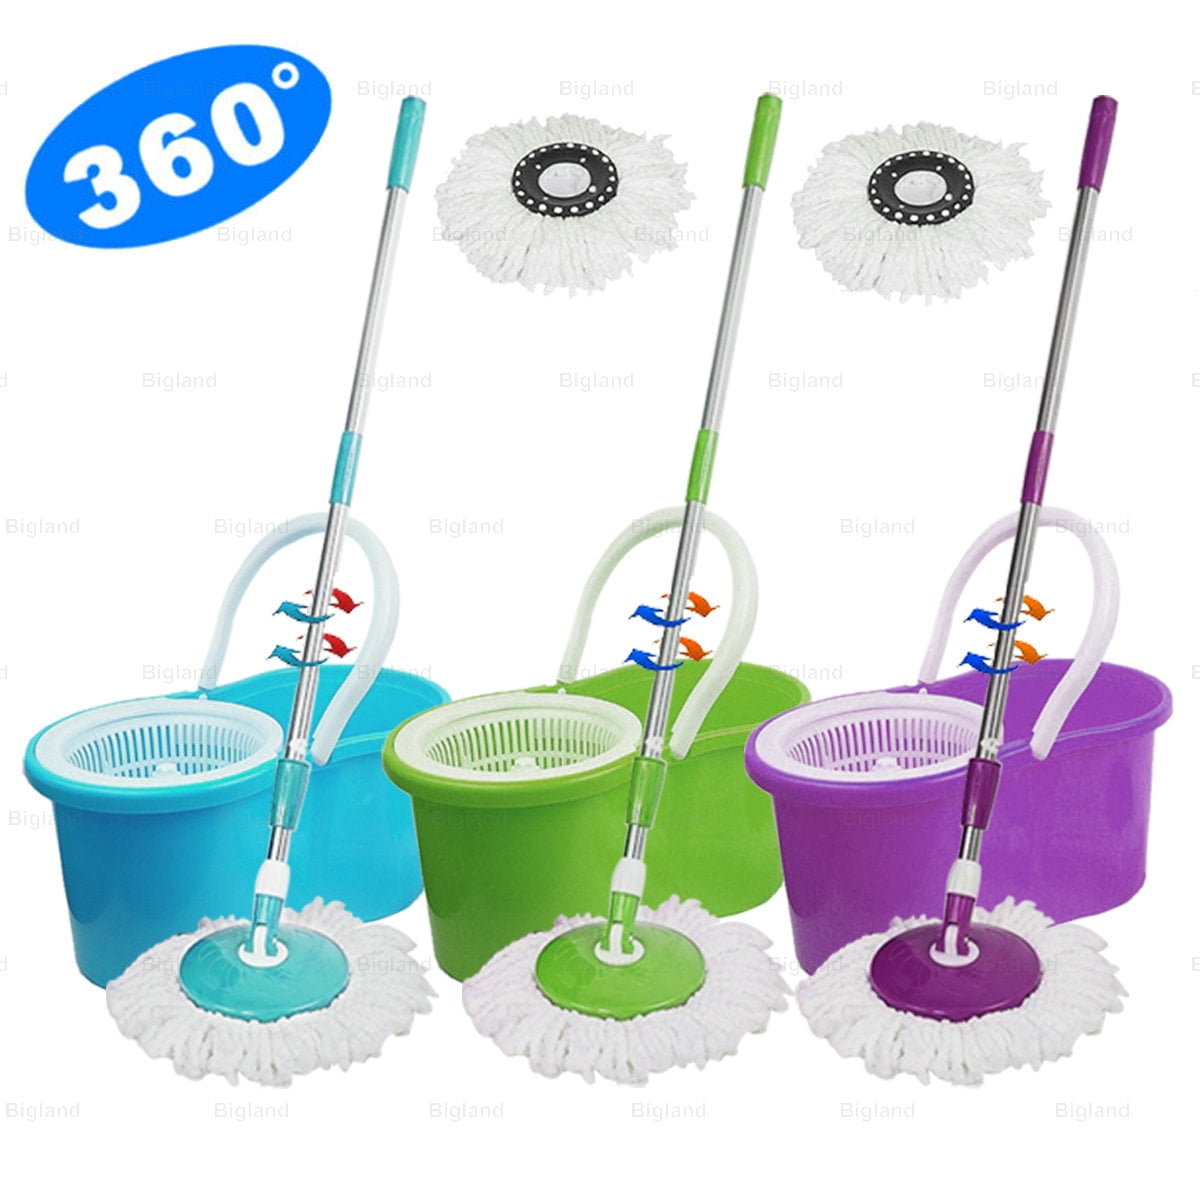 360° Spinning Rotating Floor Mop &Stainless Steel Spin Dry Bucket w/2 Mop Heads 